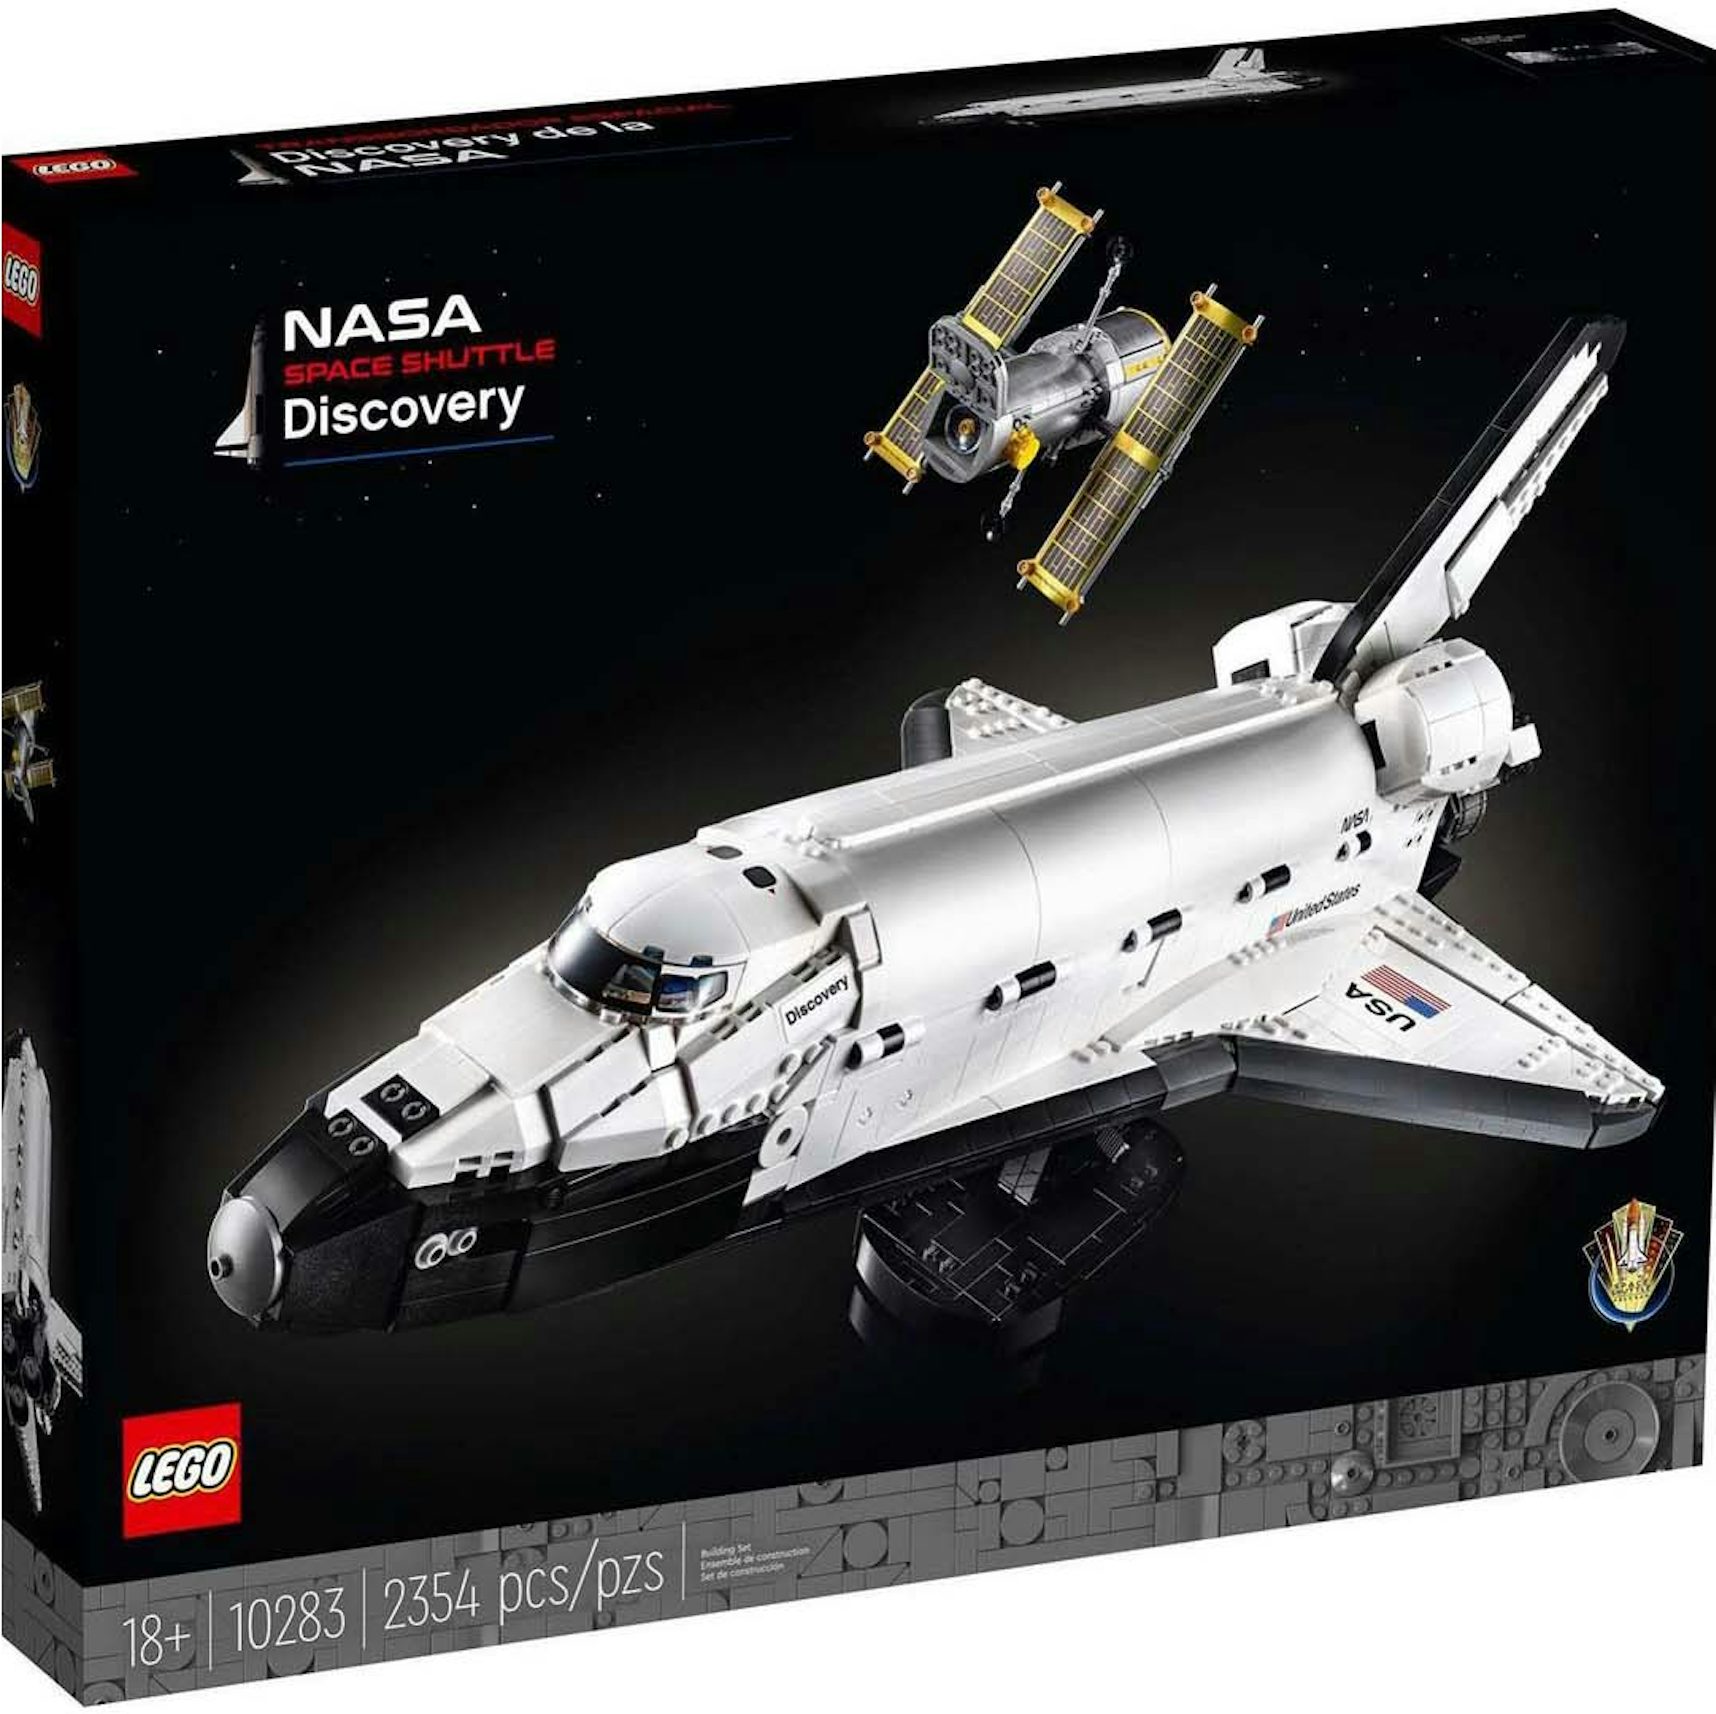 https://images.stockx.com/images/LEGO-NASA-Space-Shuttle-Discovery-Set-10283.jpg?fit=fill&bg=FFFFFF&w=1200&h=857&fm=jpg&auto=compress&dpr=2&trim=color&updated_at=1616442072&q=60